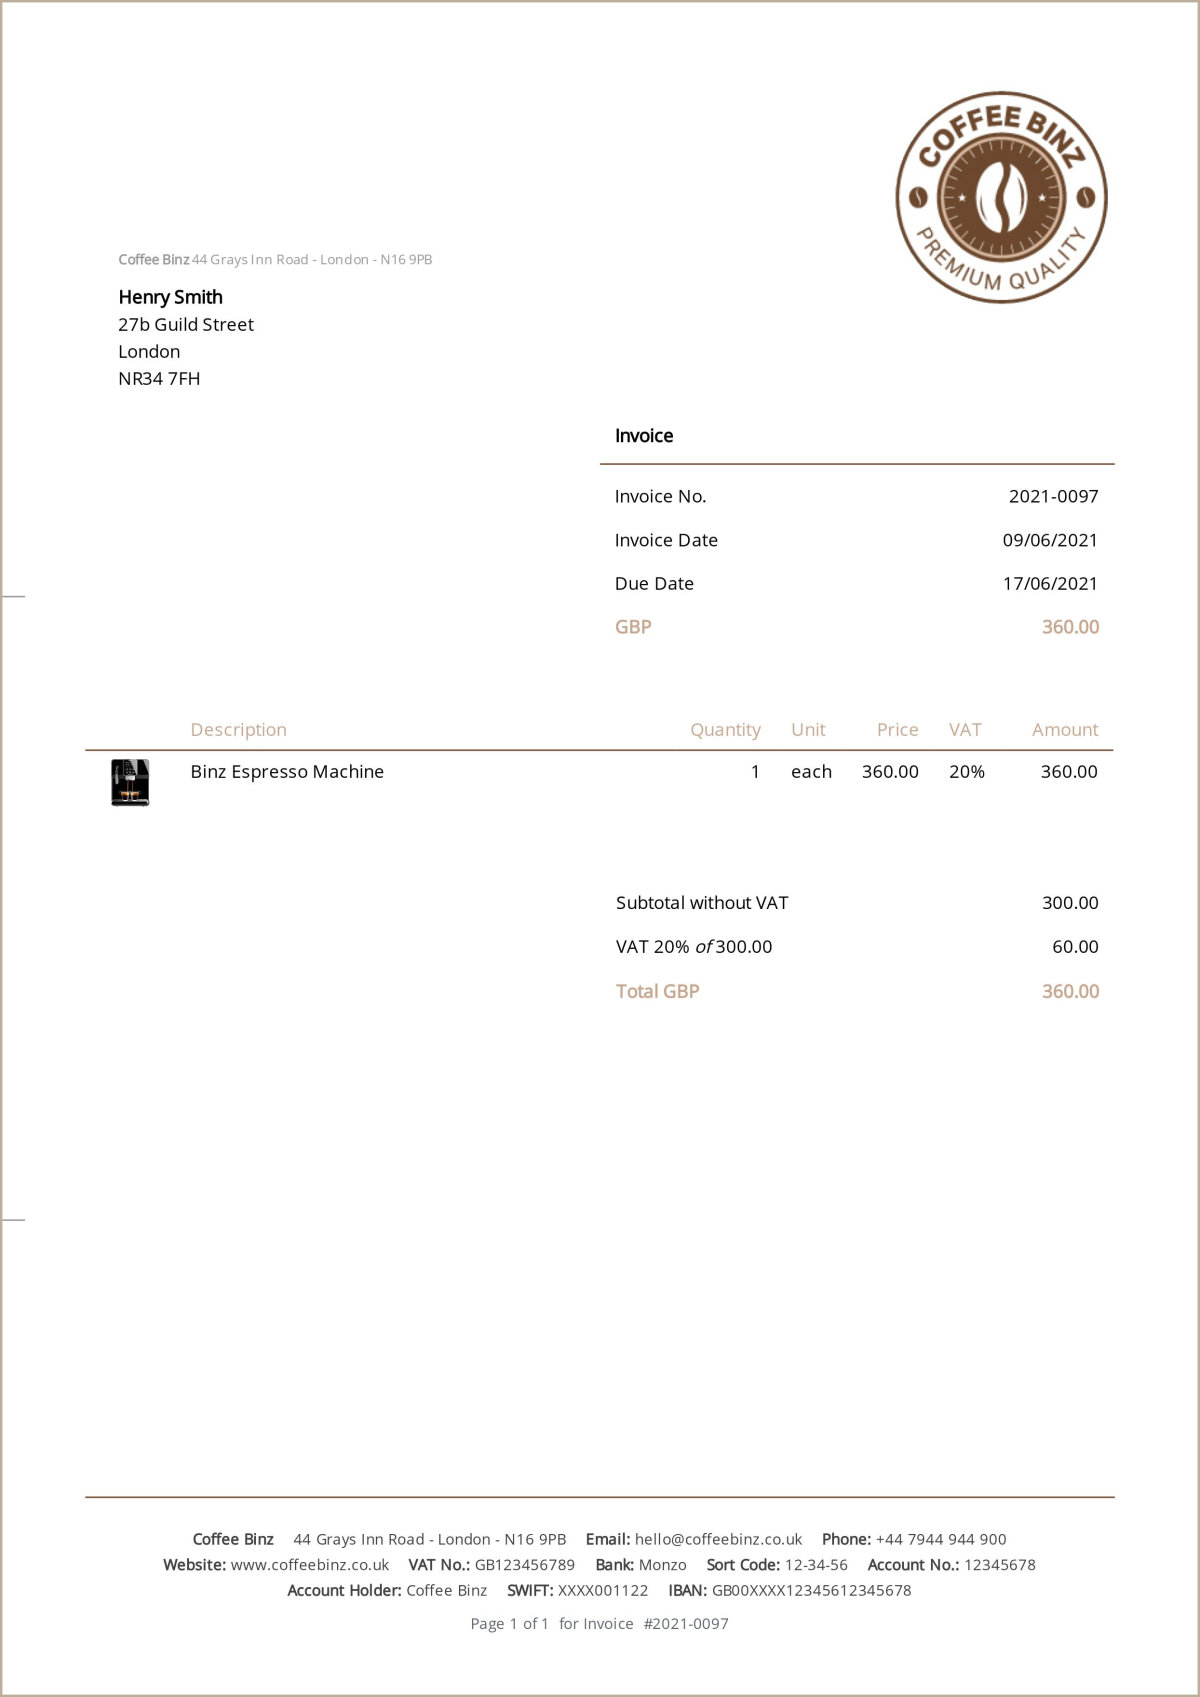 Sample invoice with prices shown in gross pricing format.